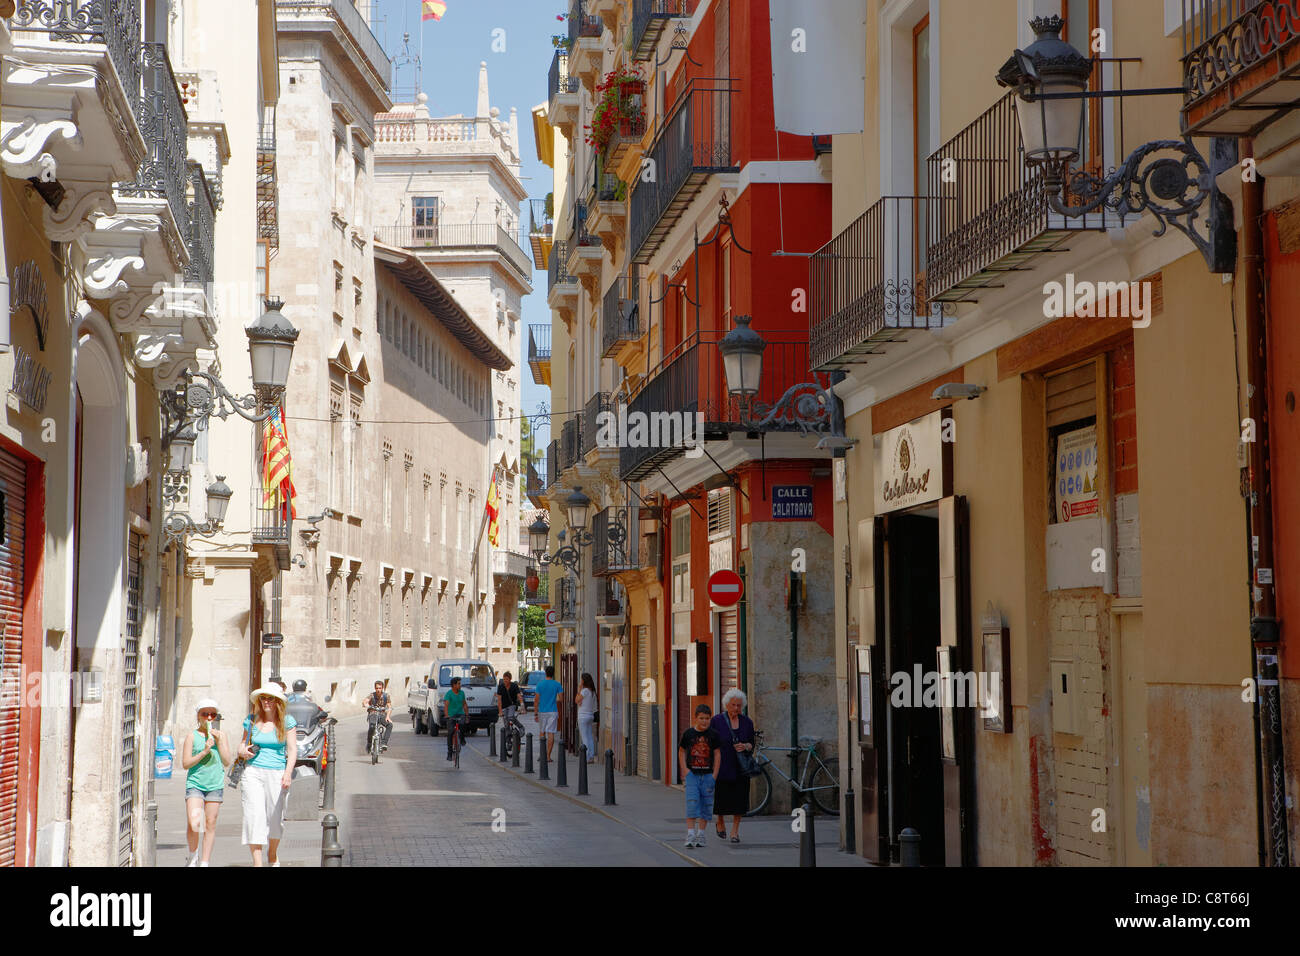 People walking along a narrow street in the old town of Valencia, Spain. Stock Photo